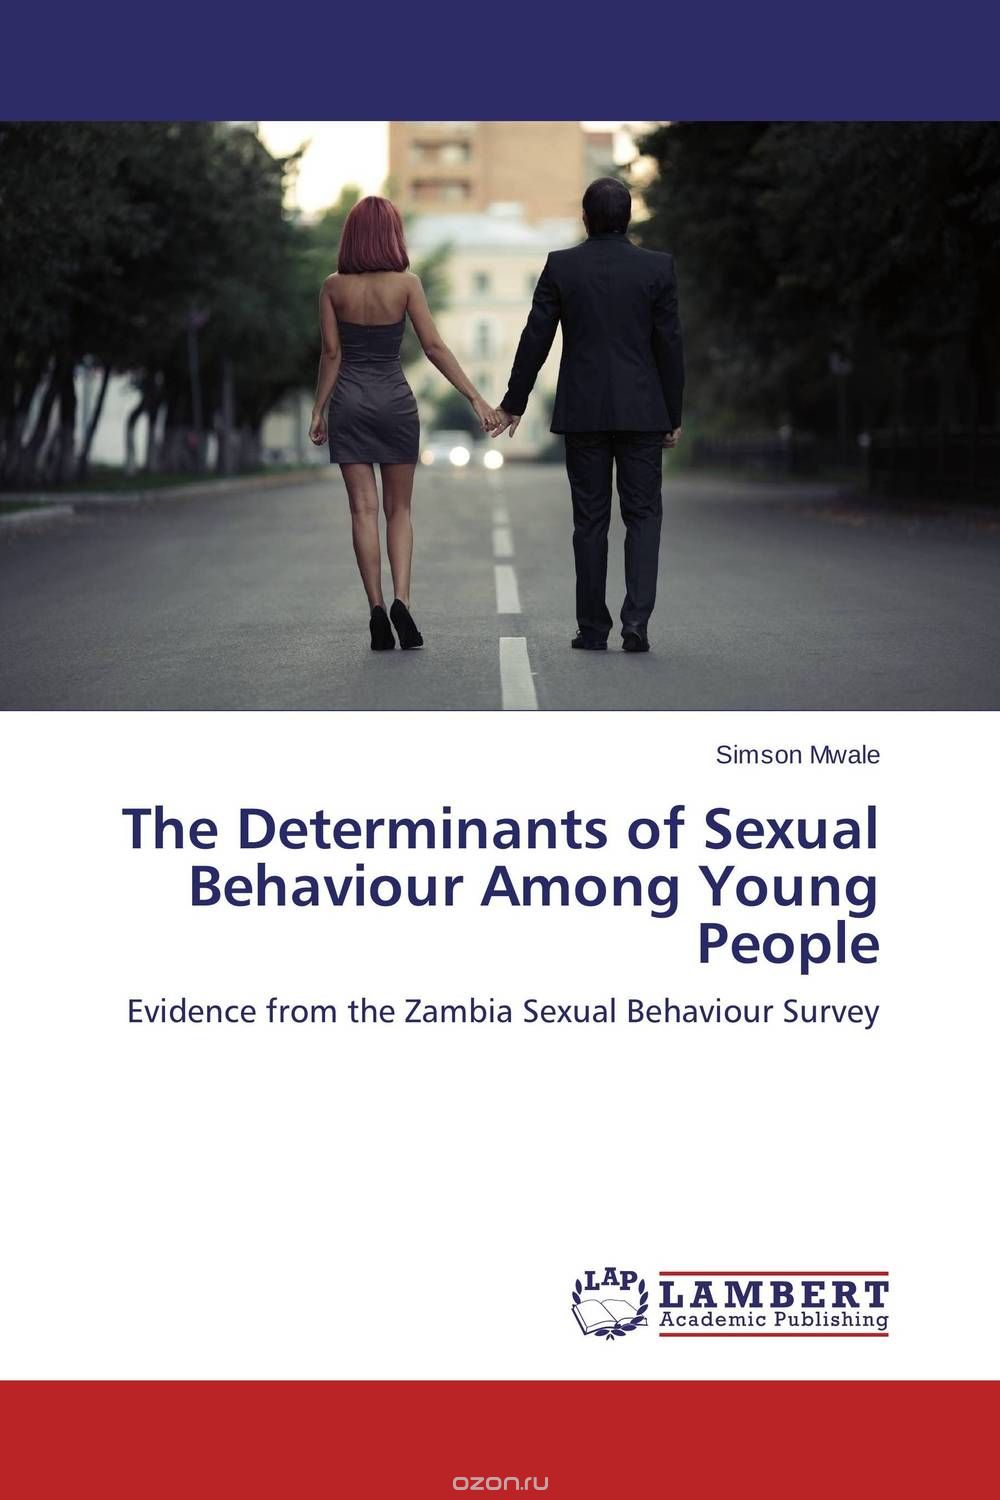 The Determinants of Sexual Behaviour Among Young People